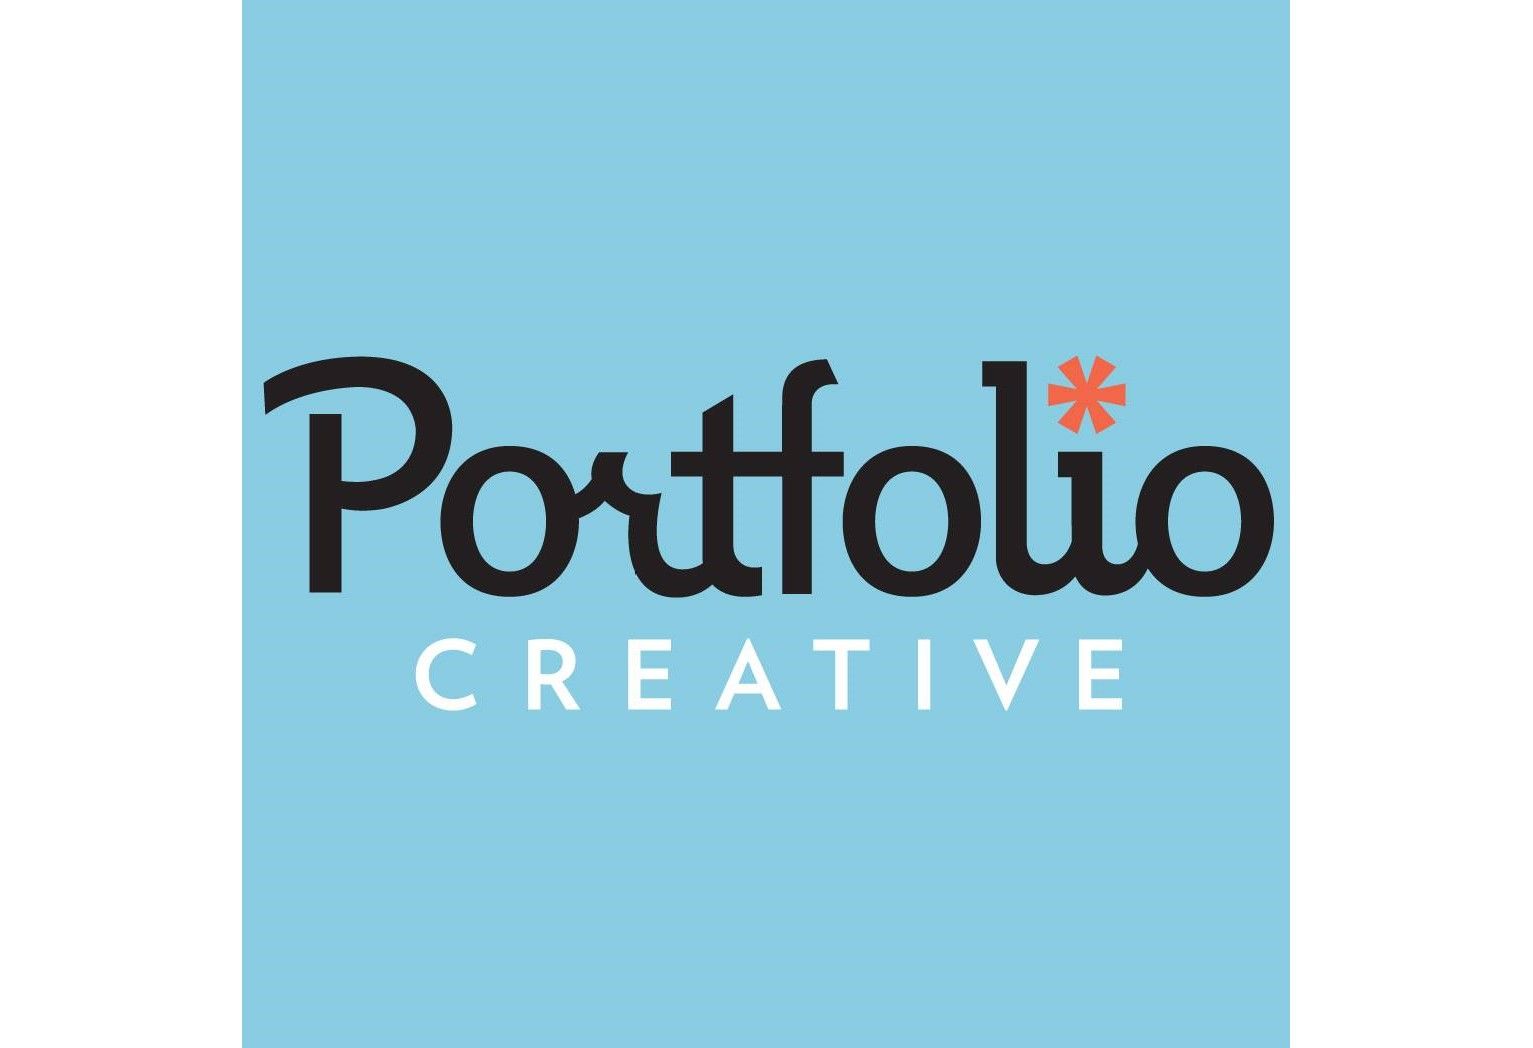 It’s Our Job to Find Solutions - Portfolio Creative